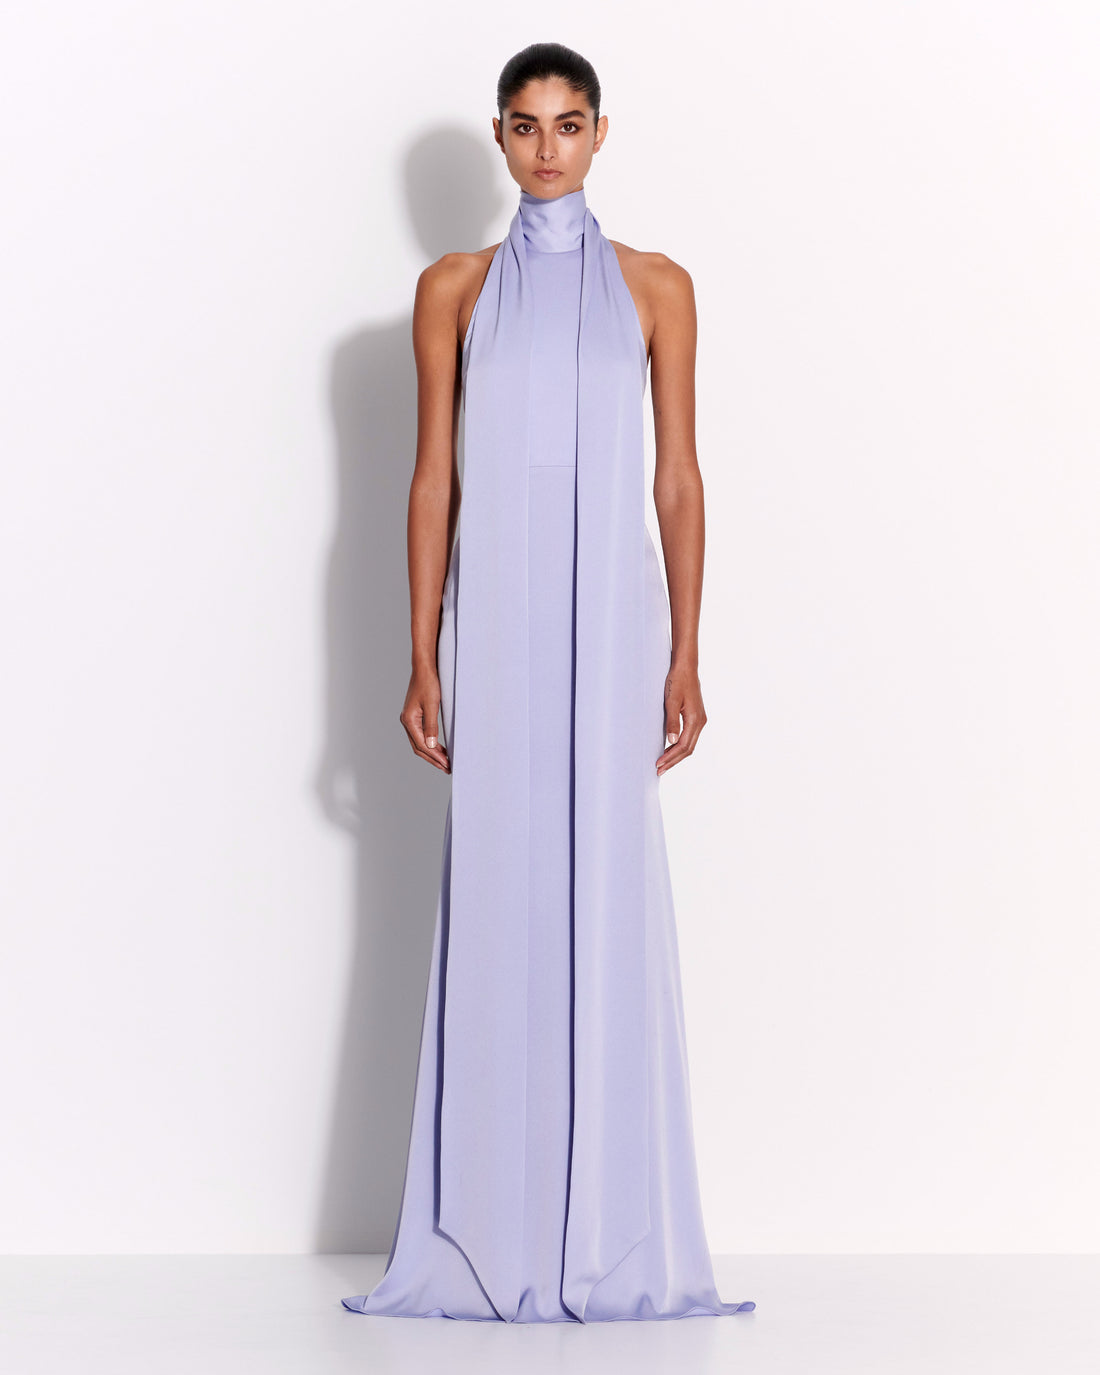 Halter Scarf Gown in Satin Crepe